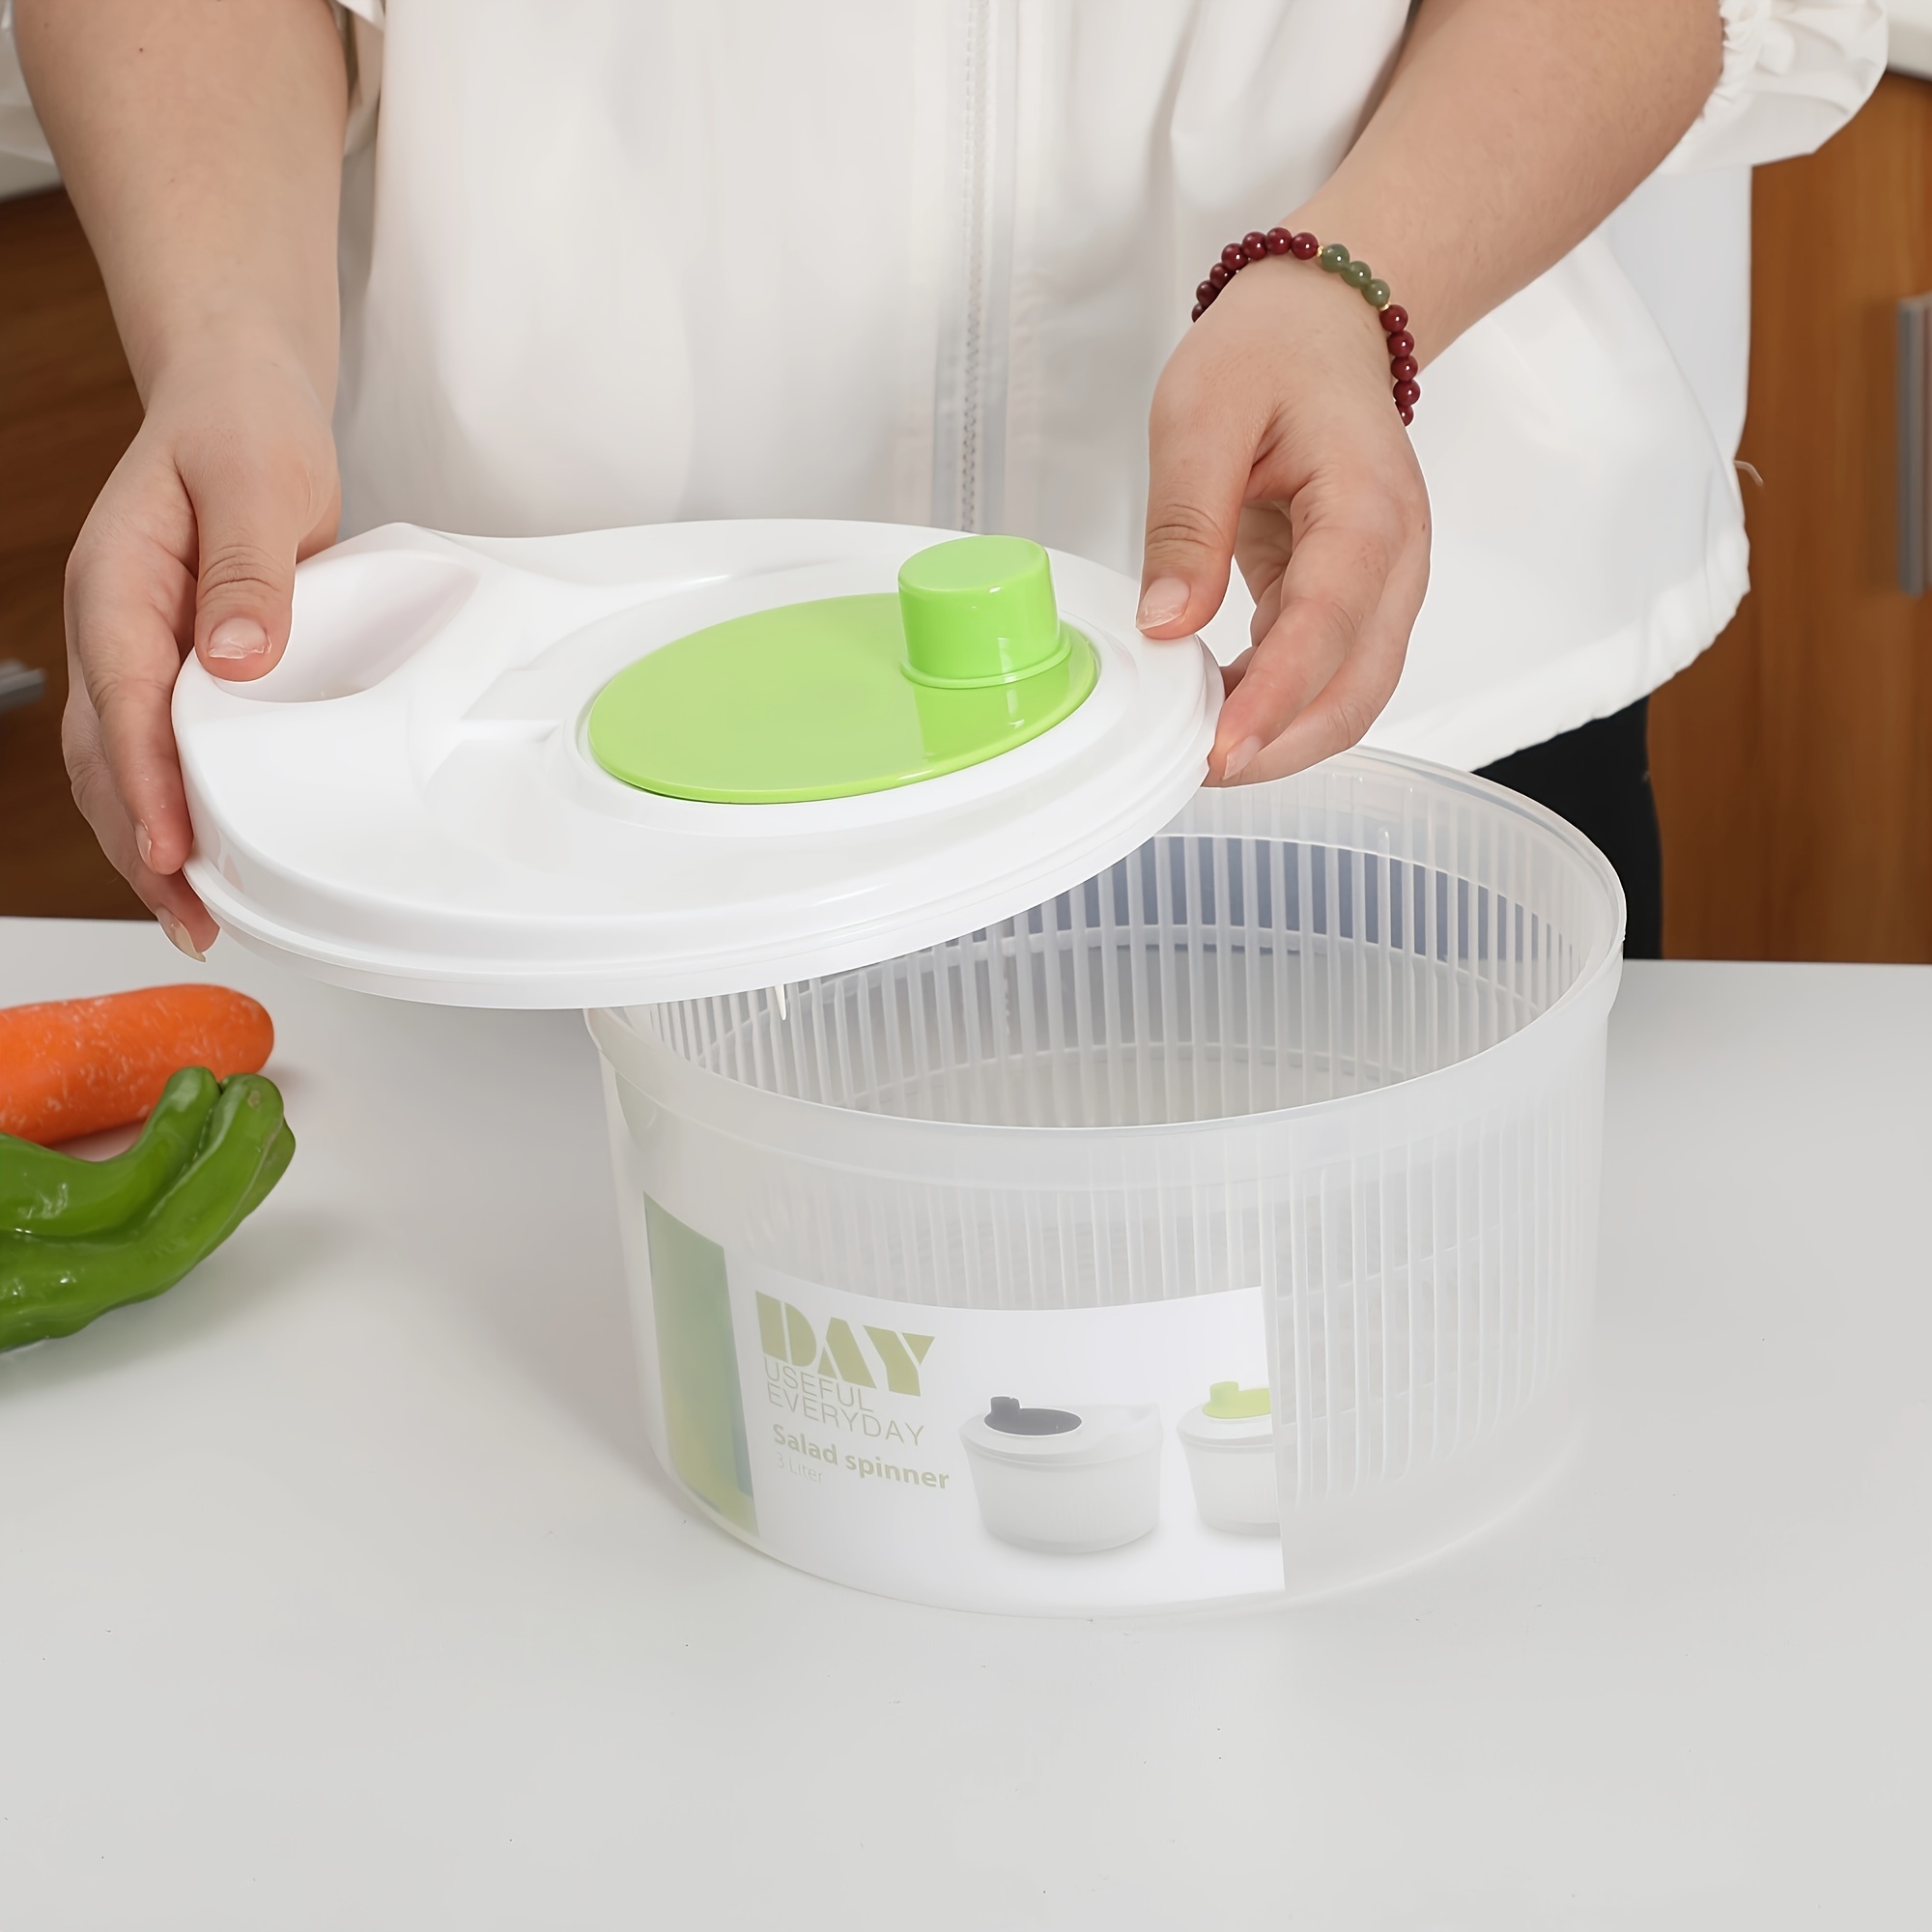 3L Salad Spinner Manual Lettuce Spinner Fruits And Vegetables Dryer With  Rotary Handle For Tastier Salads And Faster Food Prep Home Kitchen 